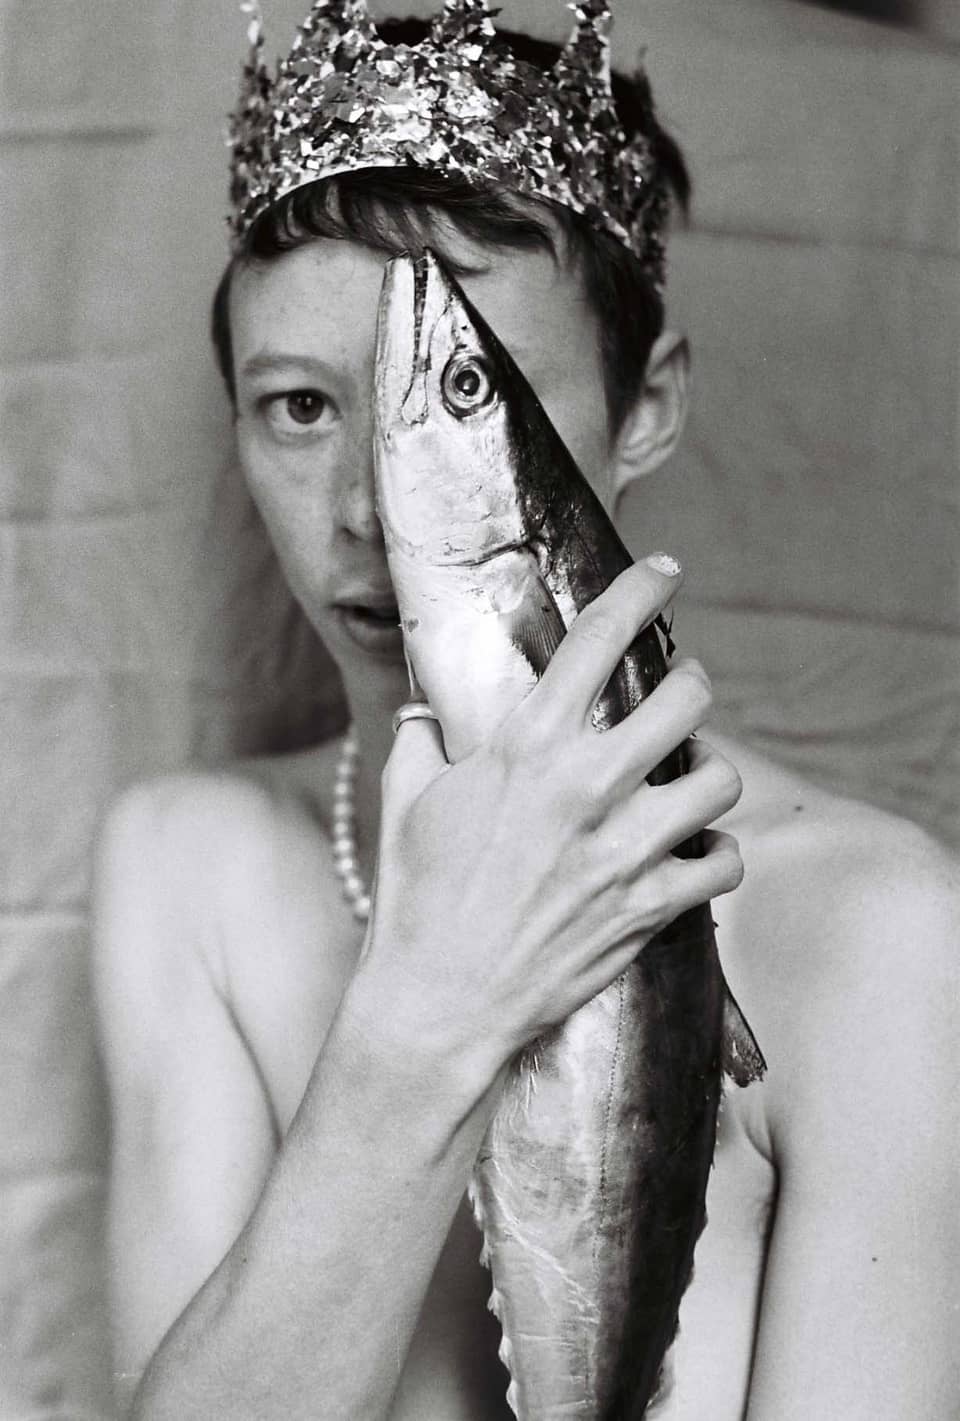 A nude in a crown holding a fish in front of their face. The fish’s eye covers one of theirs.